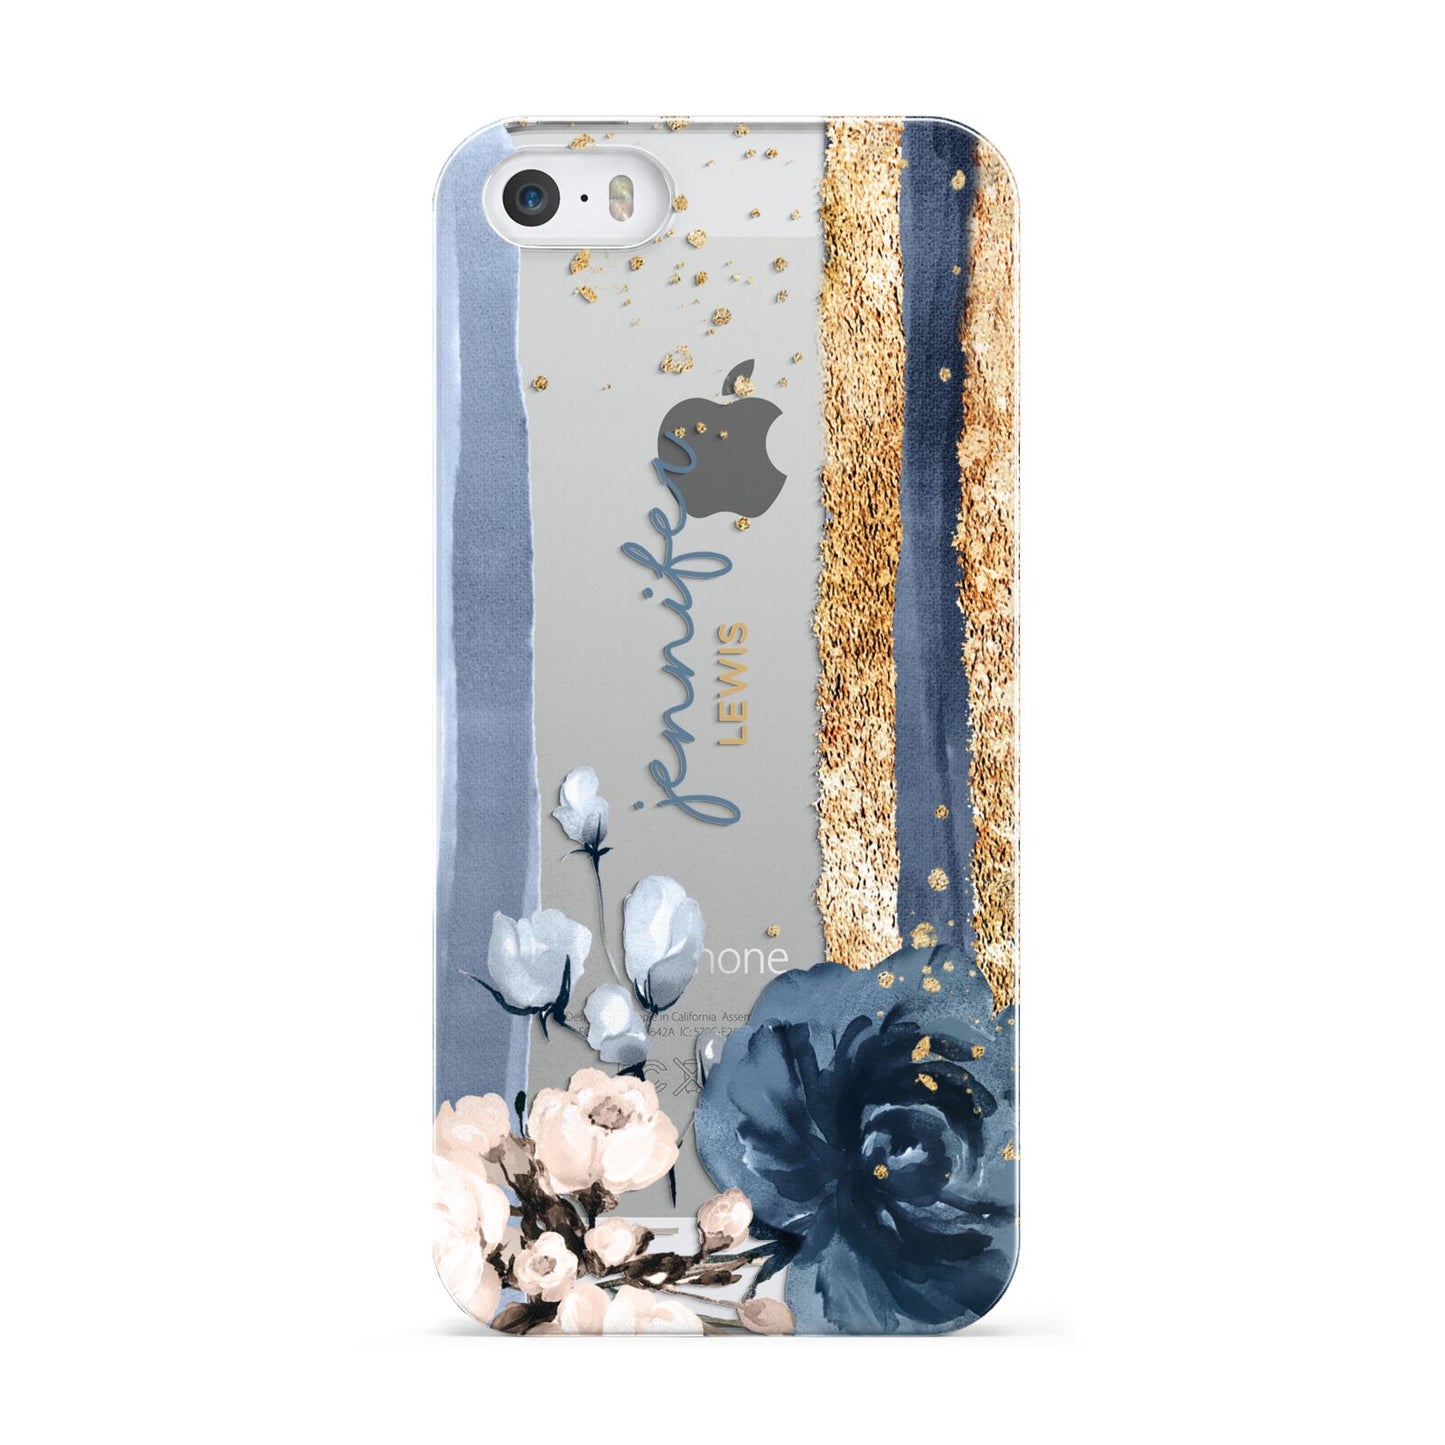 Personalised Blue Gold Name Apple iPhone 5 Case